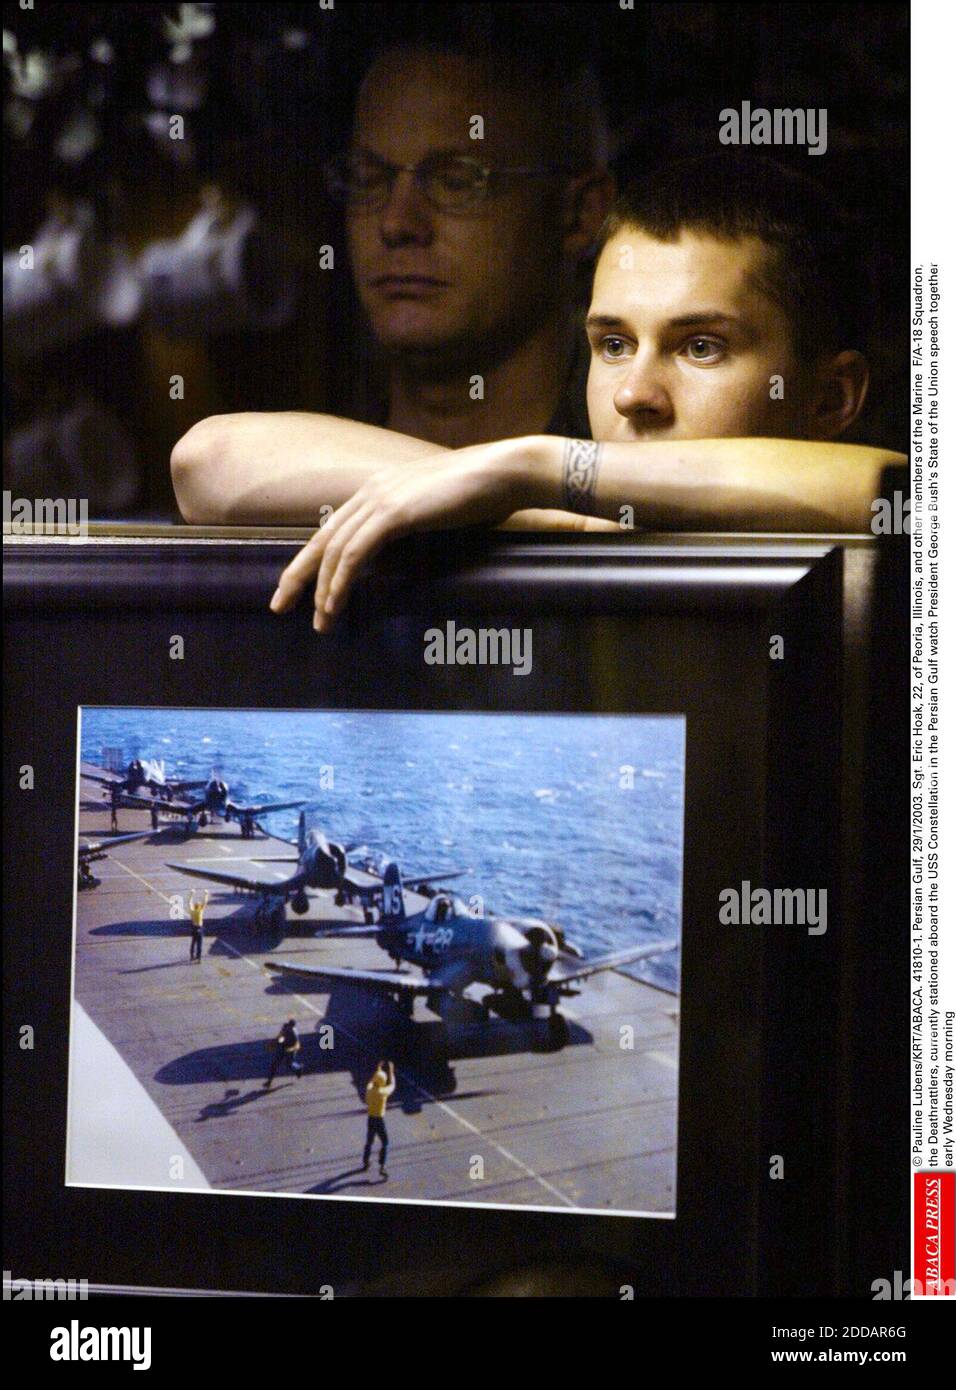 NO FILM, NO VIDEO, NO TV, NO DOCUMENTARY - © Pauline Lubens/KRT/ABACA. 41810-1. Persian Gulf, 29/1/2003. Sgt. Eric Hoak, 22, of Peoria, Illinois, and other members of the Marine F/A-18 Squadron, the Deathrattlers, currently stationed aboard the USS Constellation in the Persian Gulf watch President Stock Photo